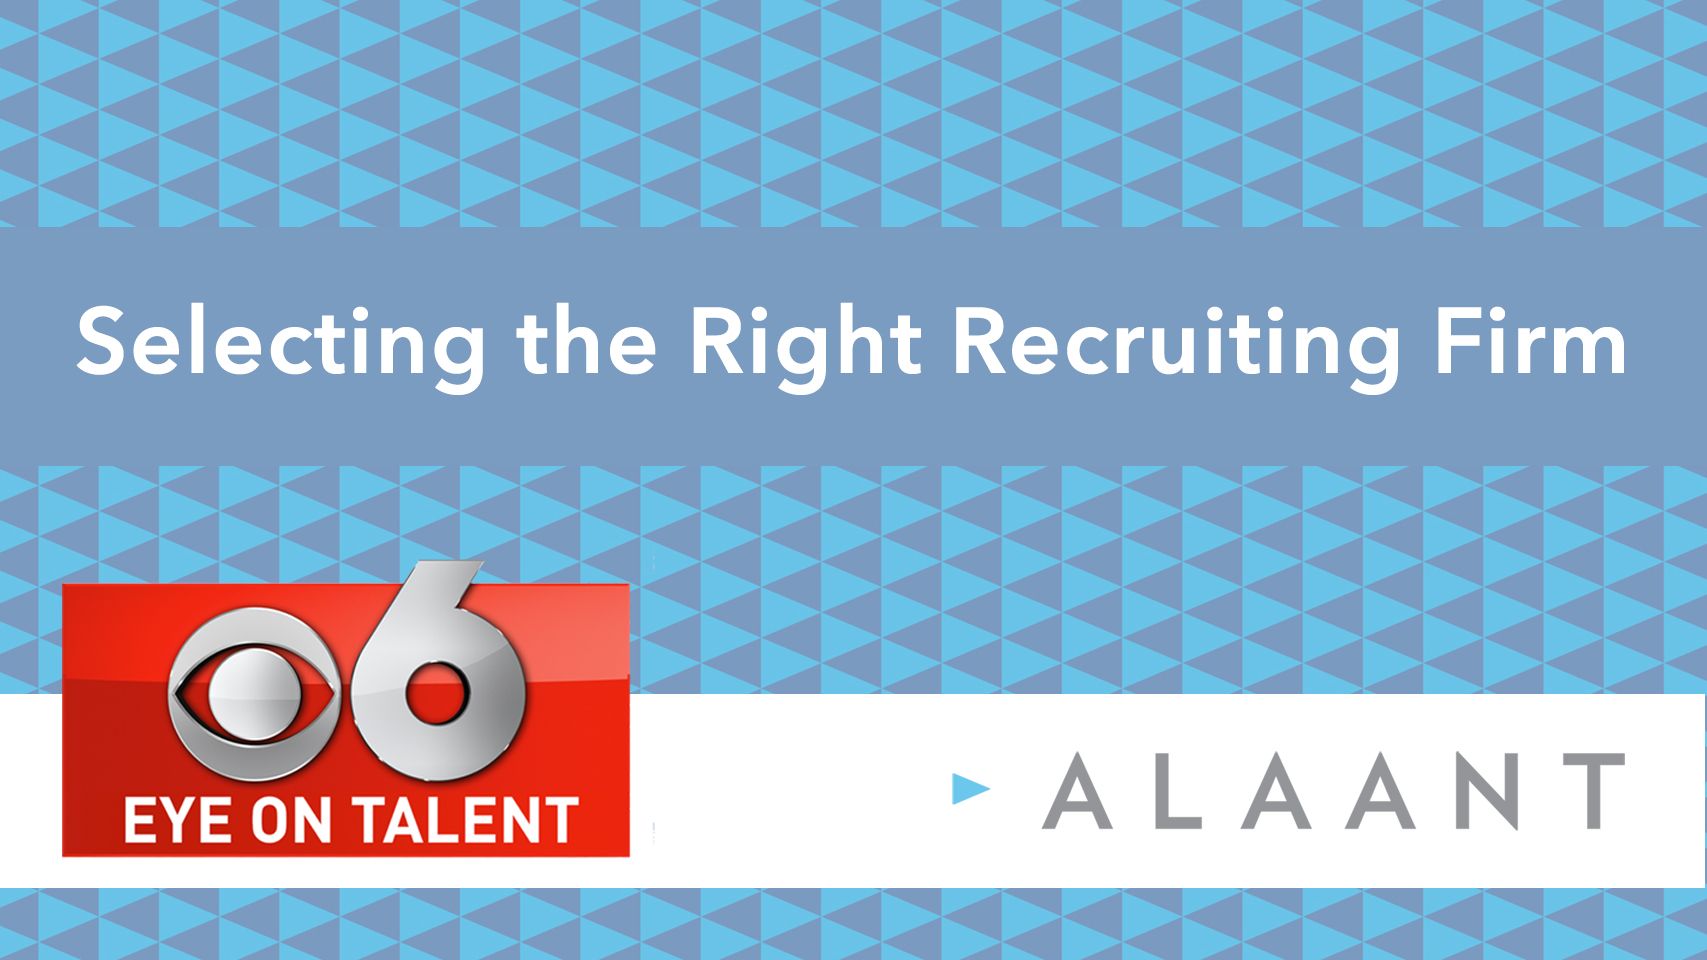 Alaant Eye on Talent Selecting the Right Recruiting Firm